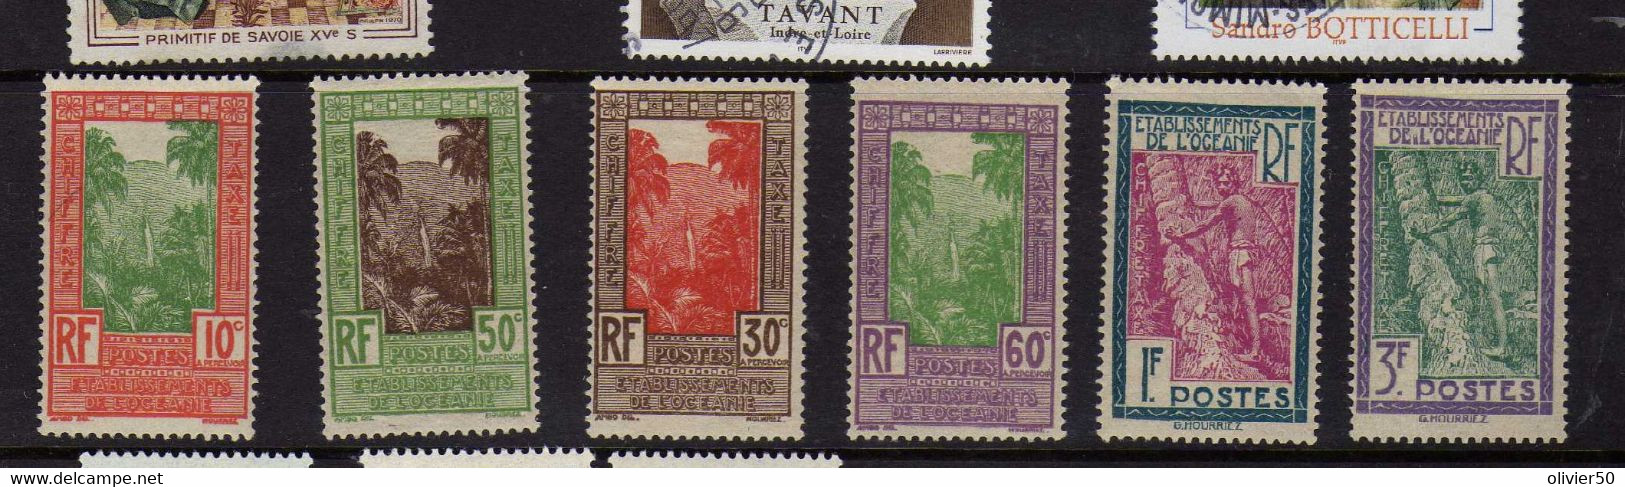 Ets  Oceanie  Timbres-Taxe   Neufs*/sg - Postage Due